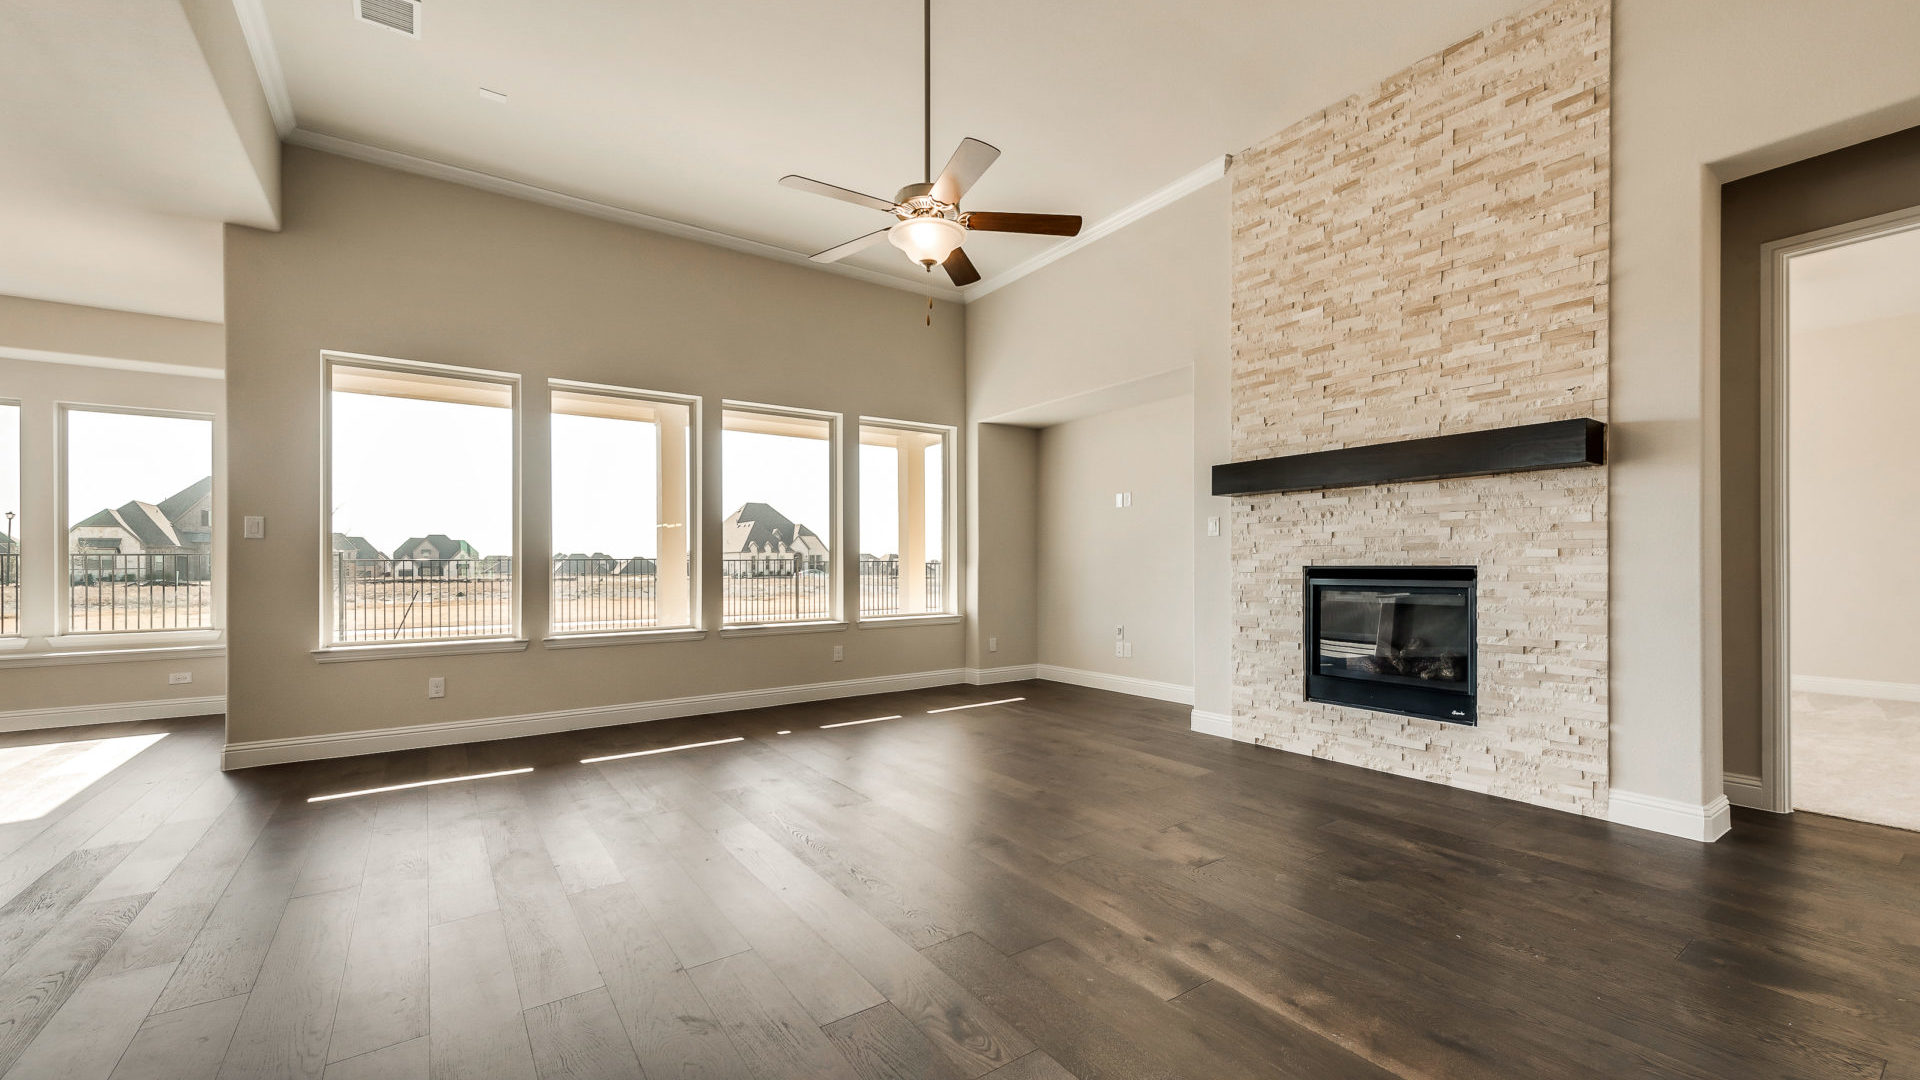 Nelson Lake - Now Accepting Visits! new homes in Rockwall, TX